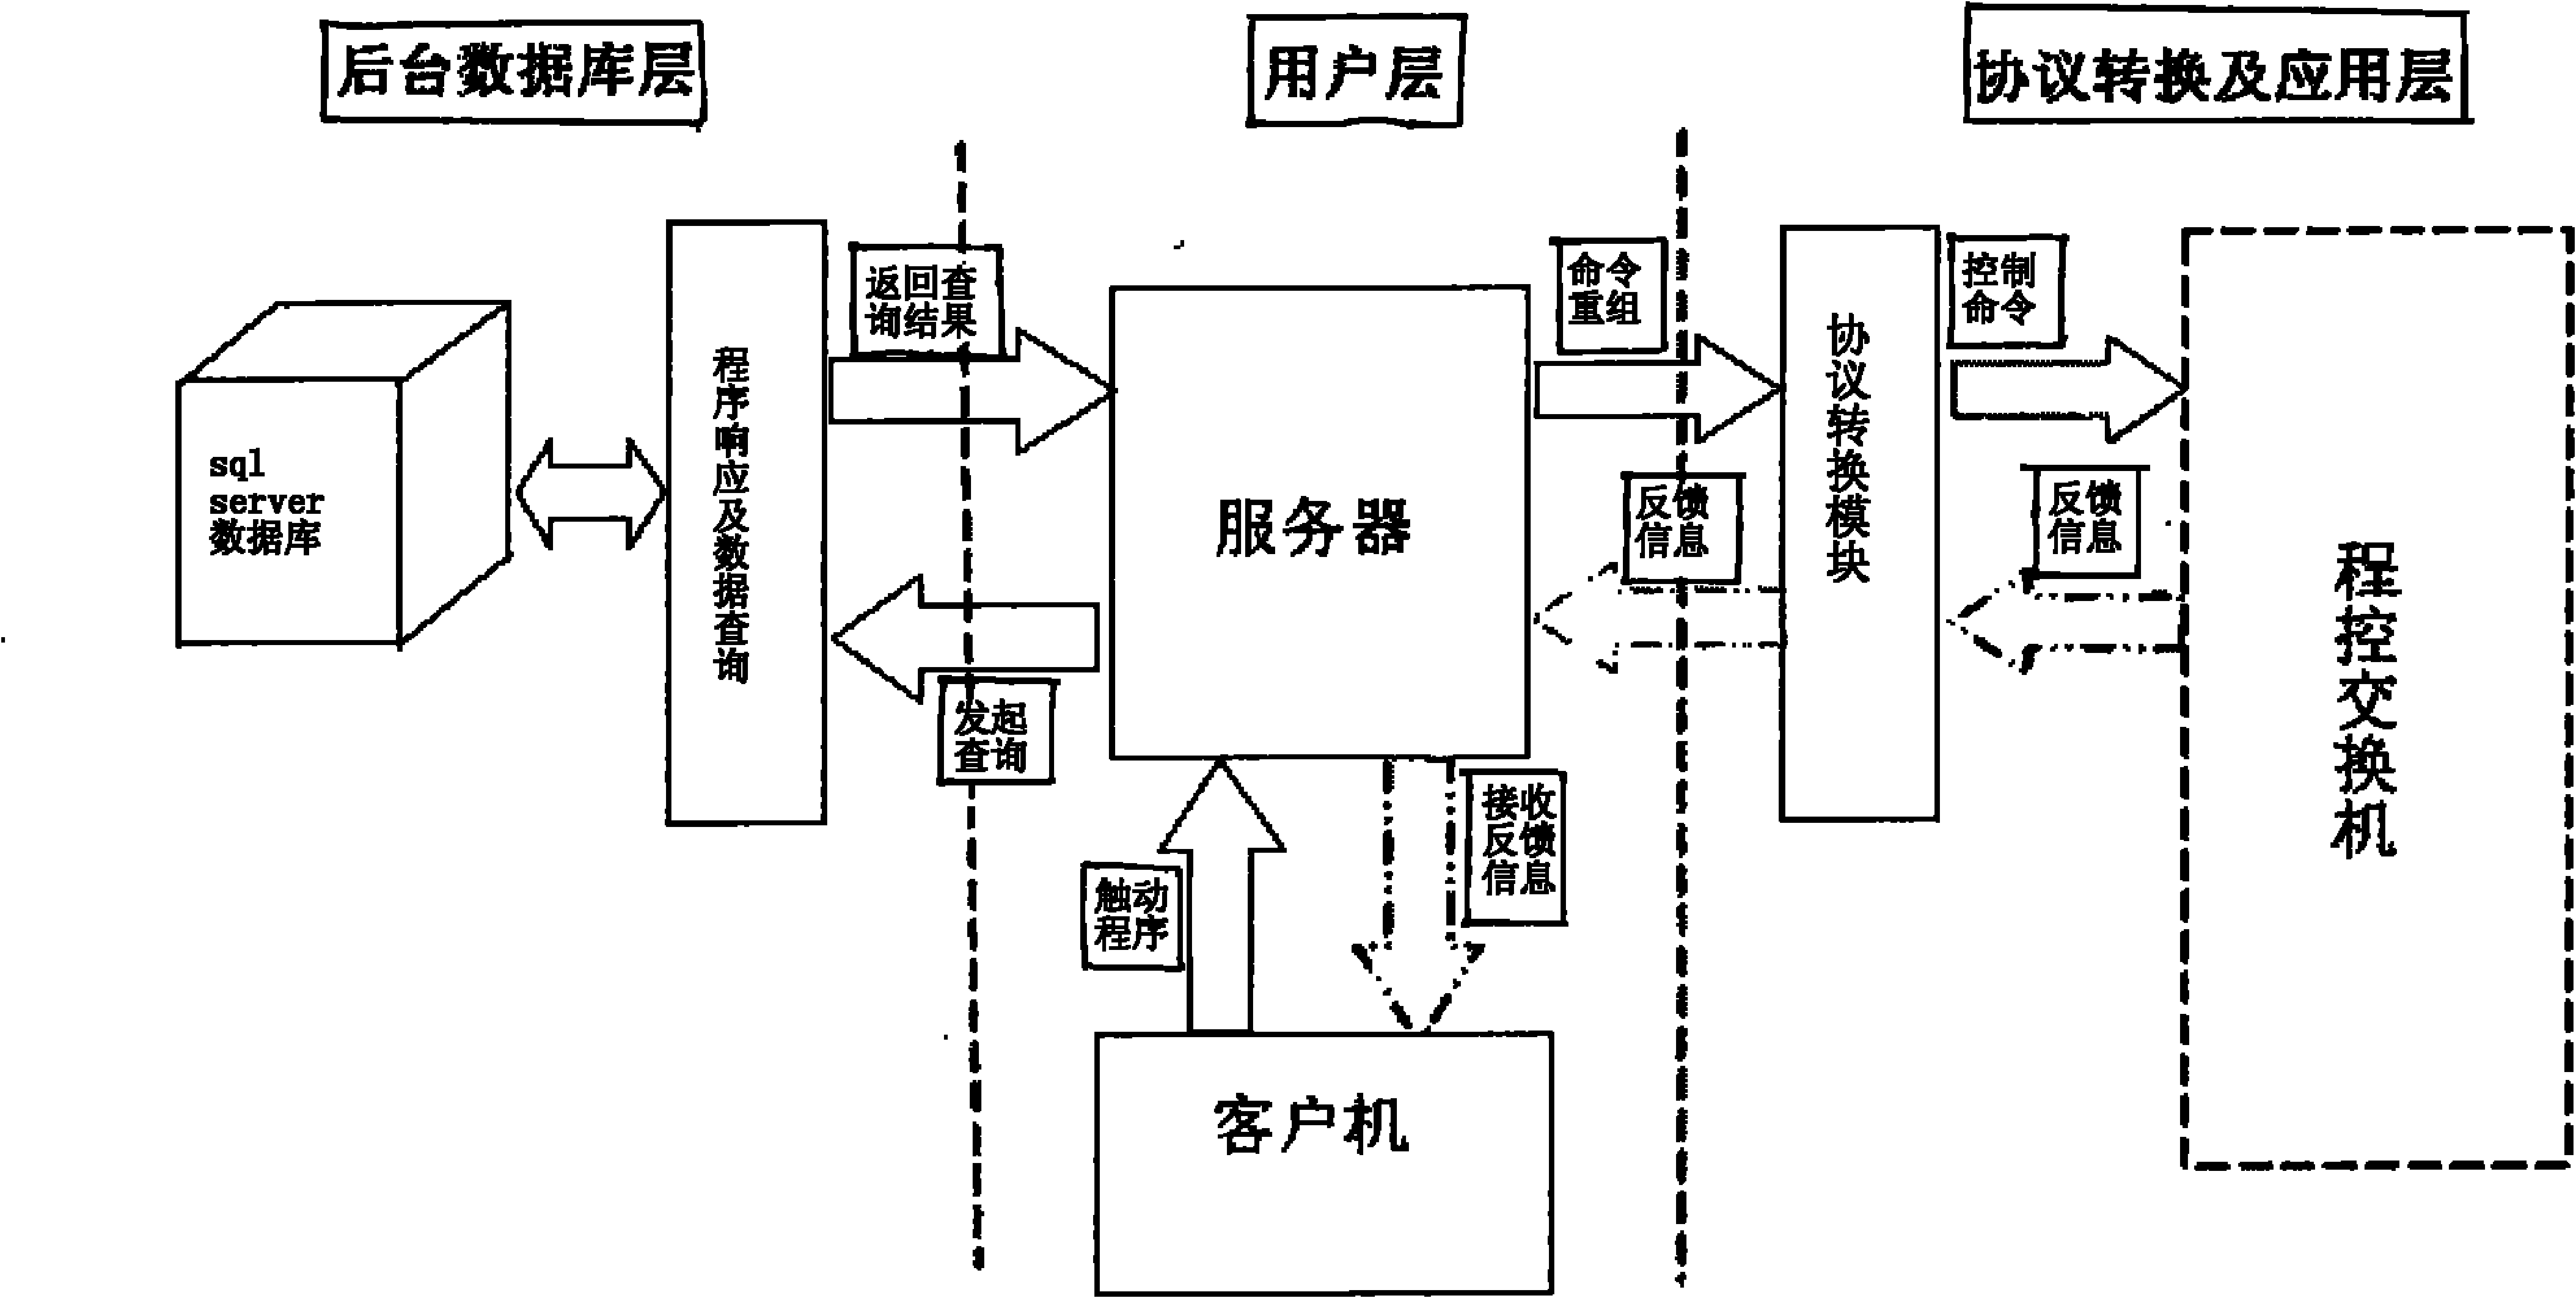 Method for developing management system of program-controlled switch by using asp technology